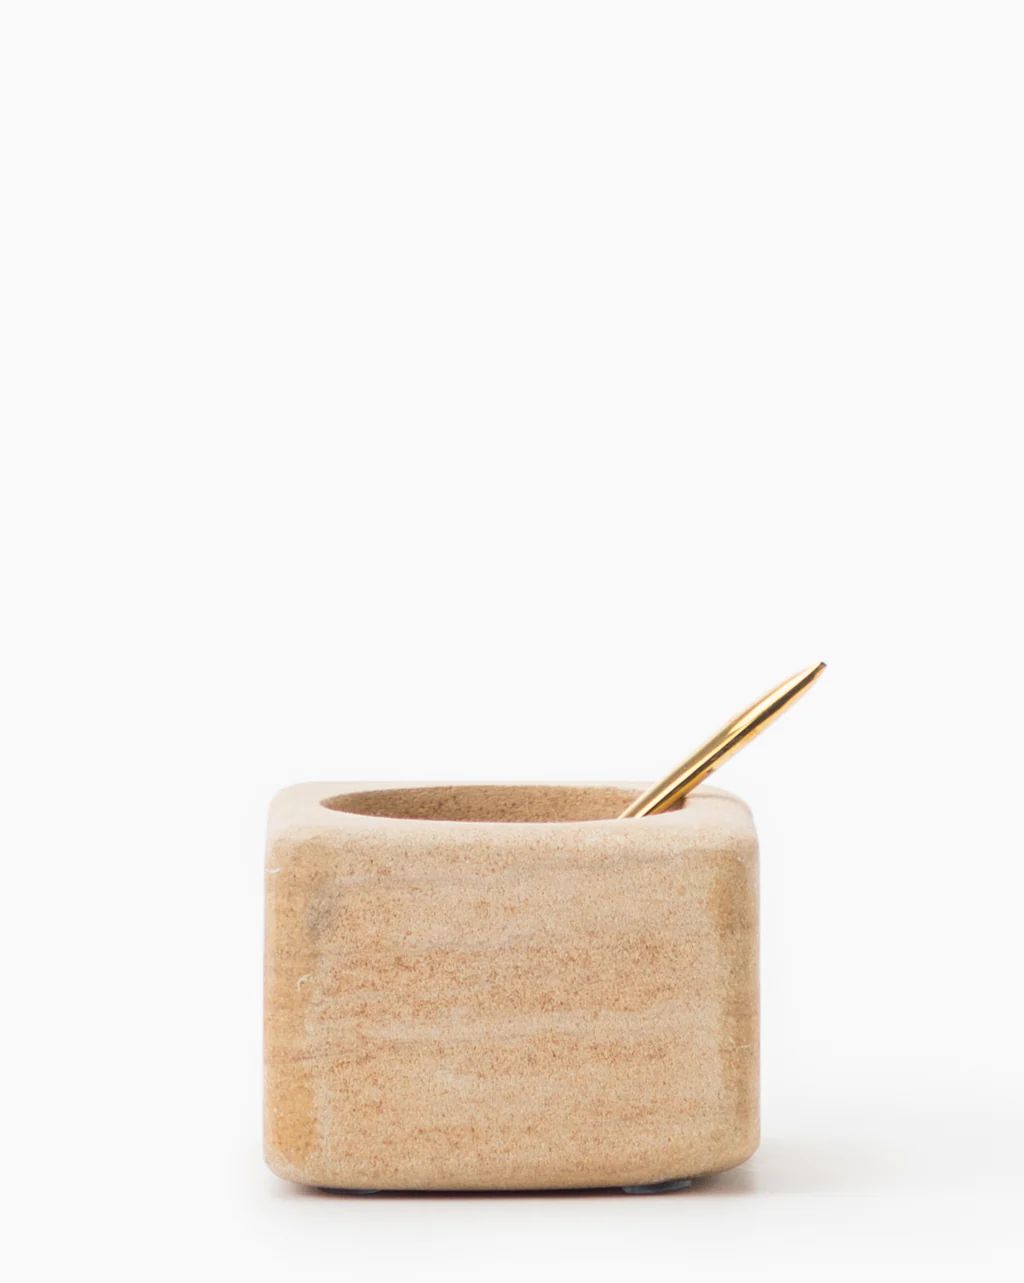 Sandstone Pinch Pot with Brass Spoon | McGee & Co.